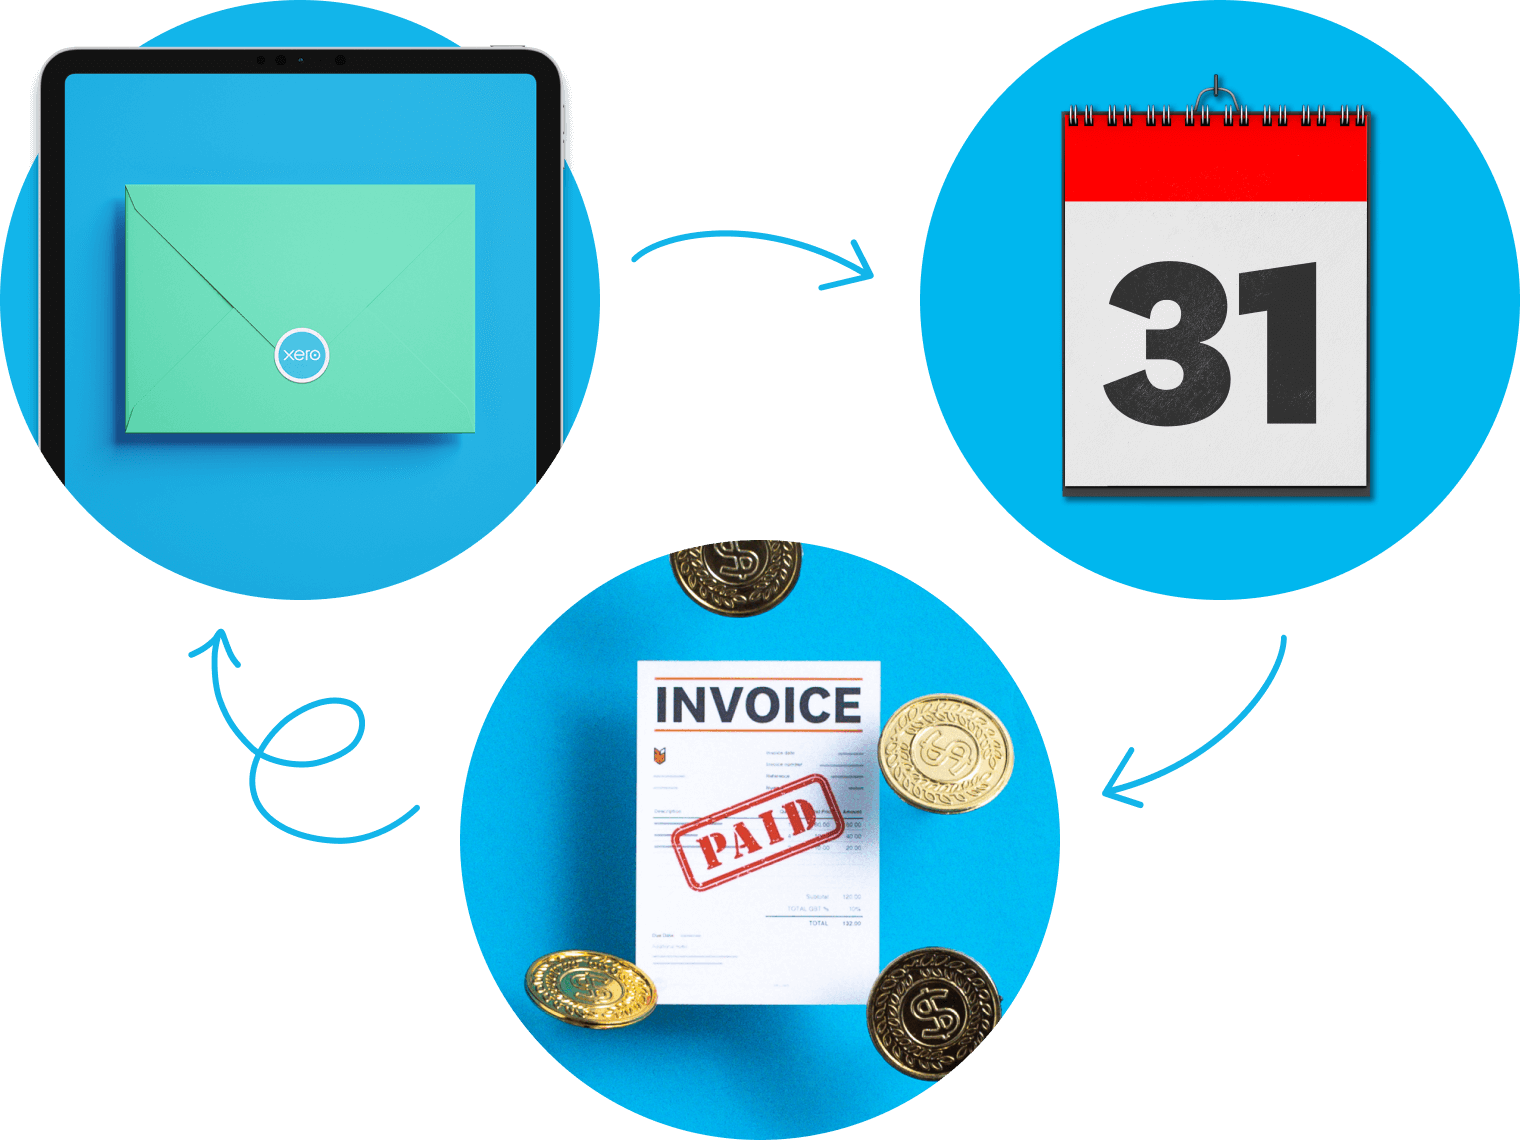 Three images showing an envelope, a calendar and an invoice paid. 